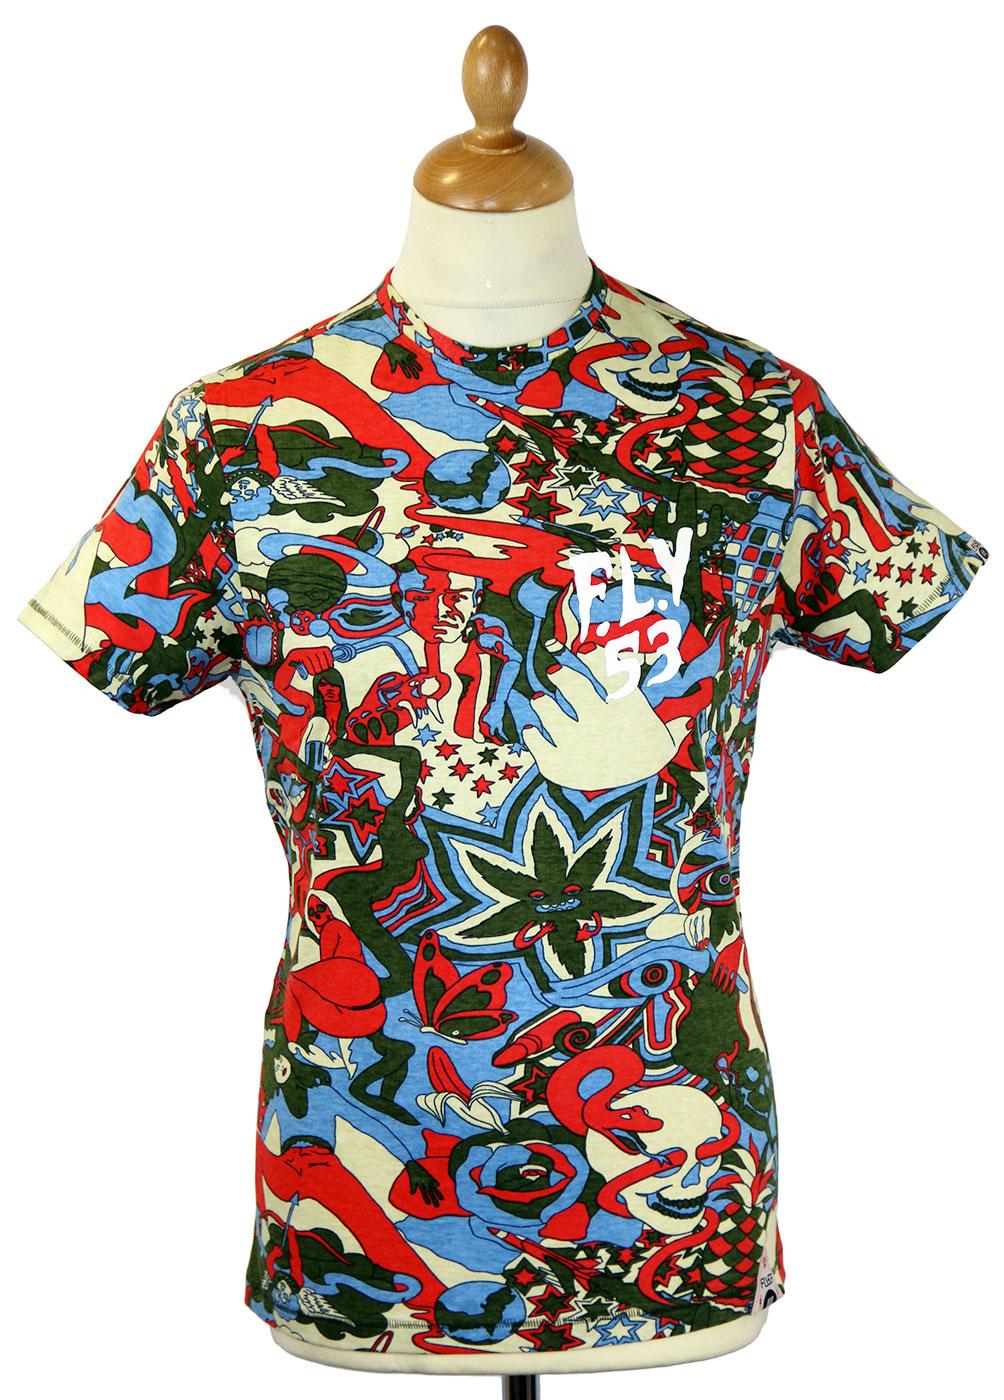 Wolfe FLY53 Retro 60s Psychedelic Graphic T-shirt